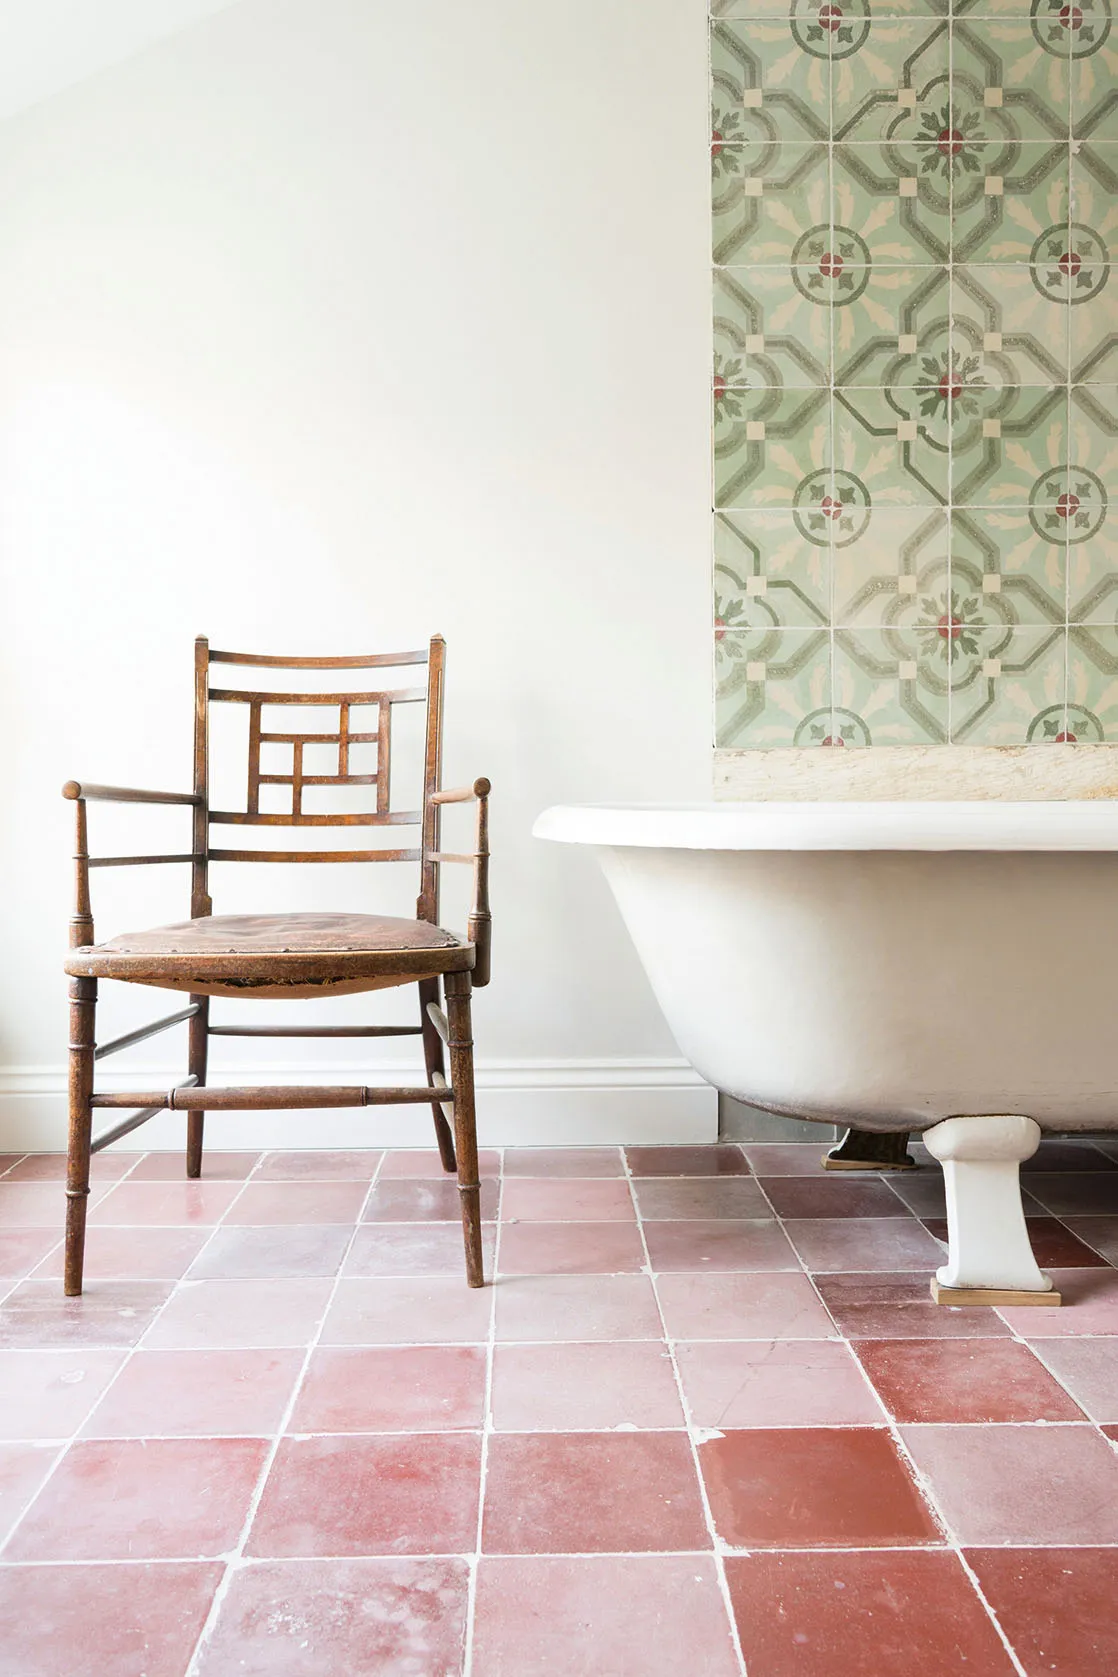 Encaustic wall tiles with reclaimed terracotta floor tiles from Maitland & Poate